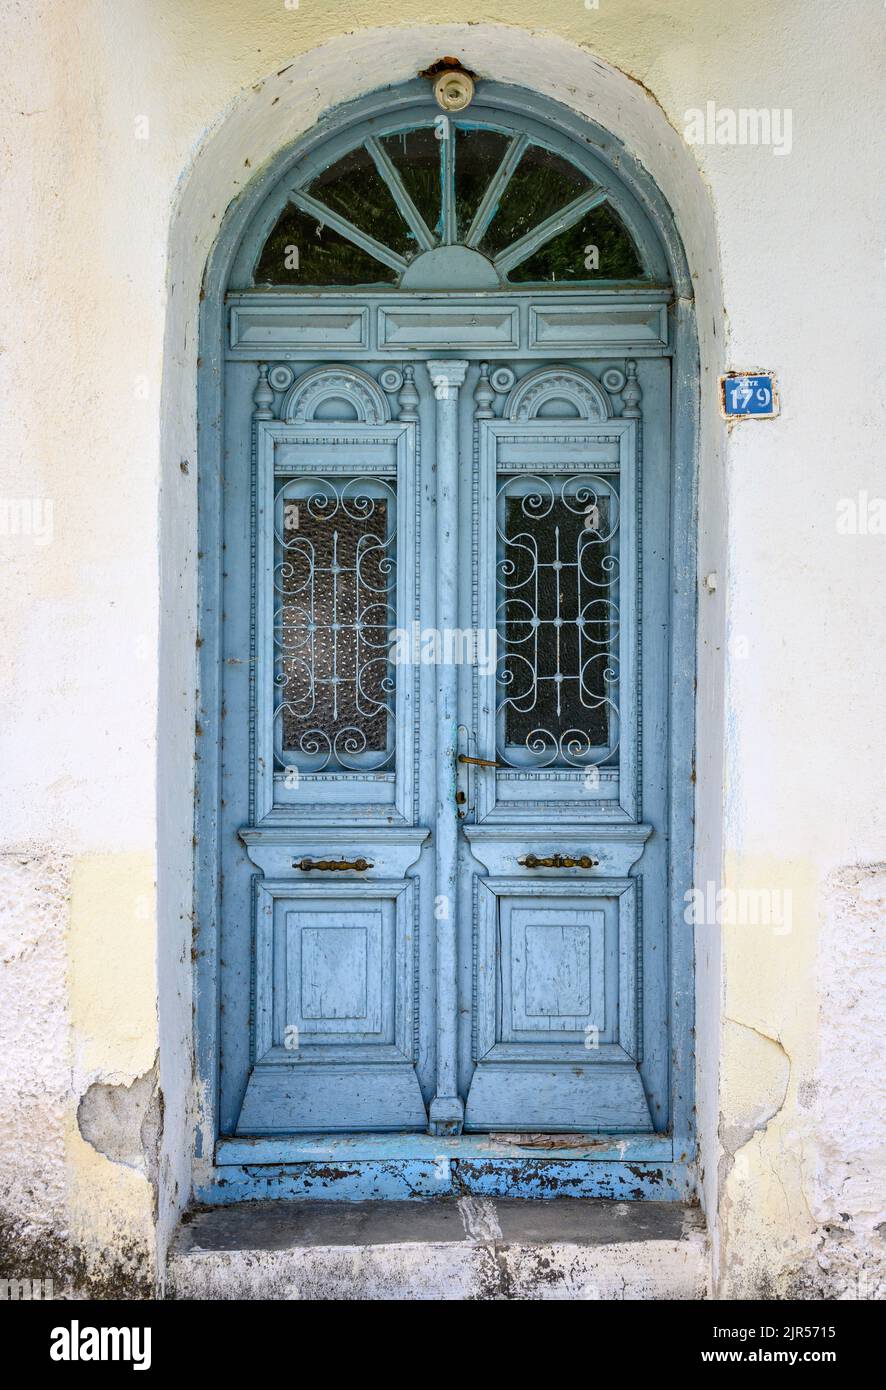 Decorated door to a house in the, semi abandoned, village of Antartiko, Prespes municipality, Florina,  Macedonia. Greece. The village has suffered fr Stock Photo